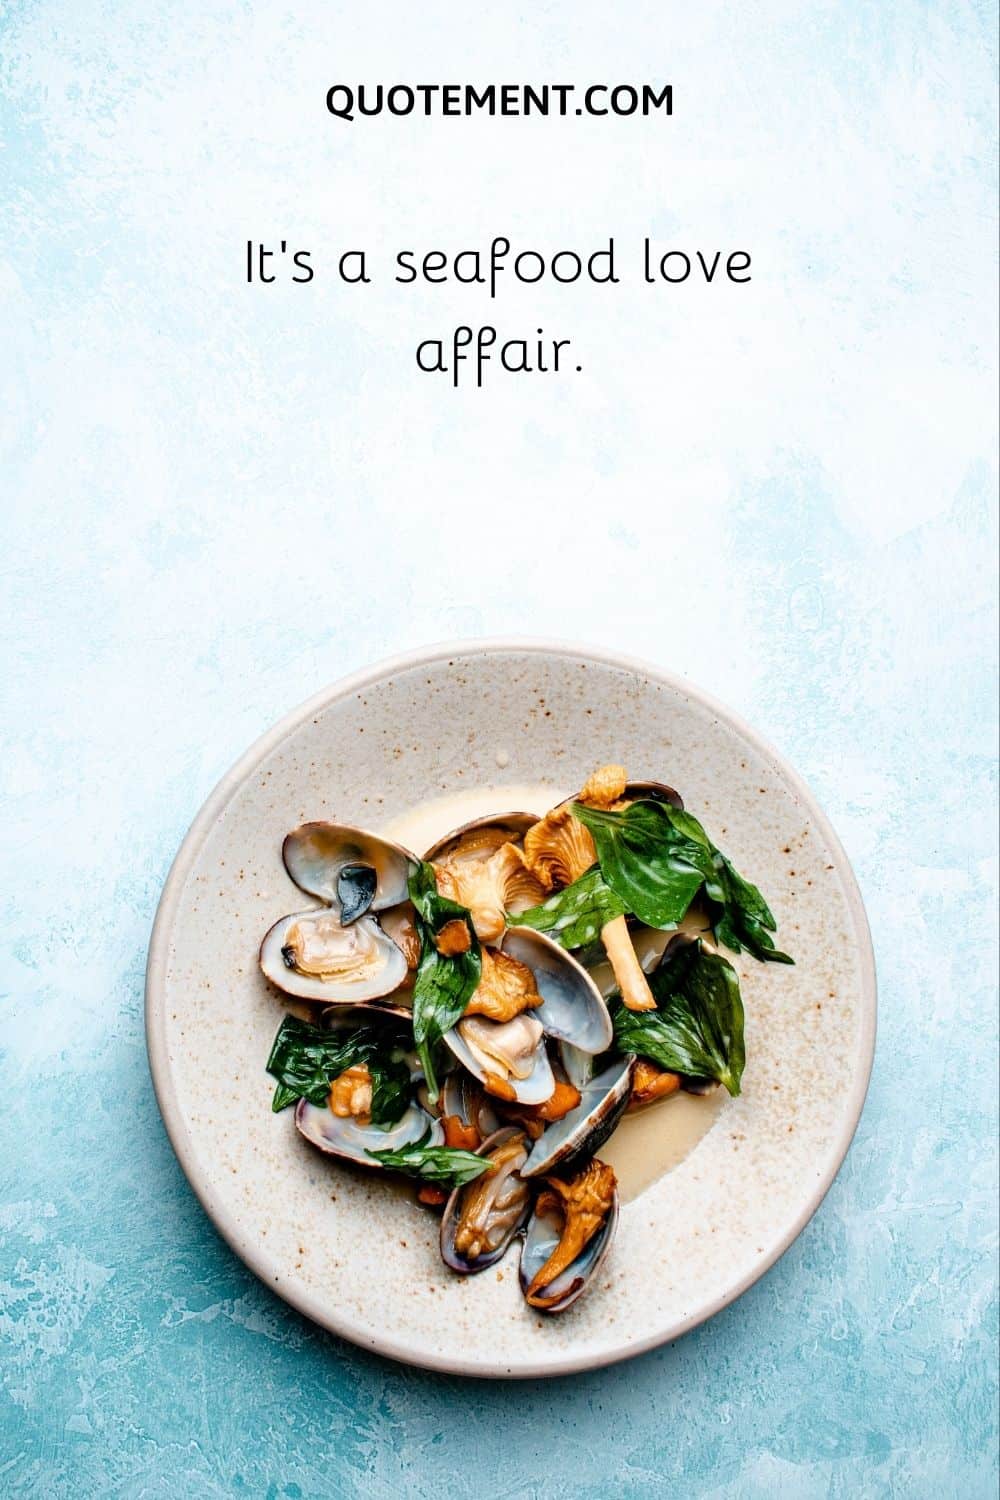 It’s a seafood love affair.